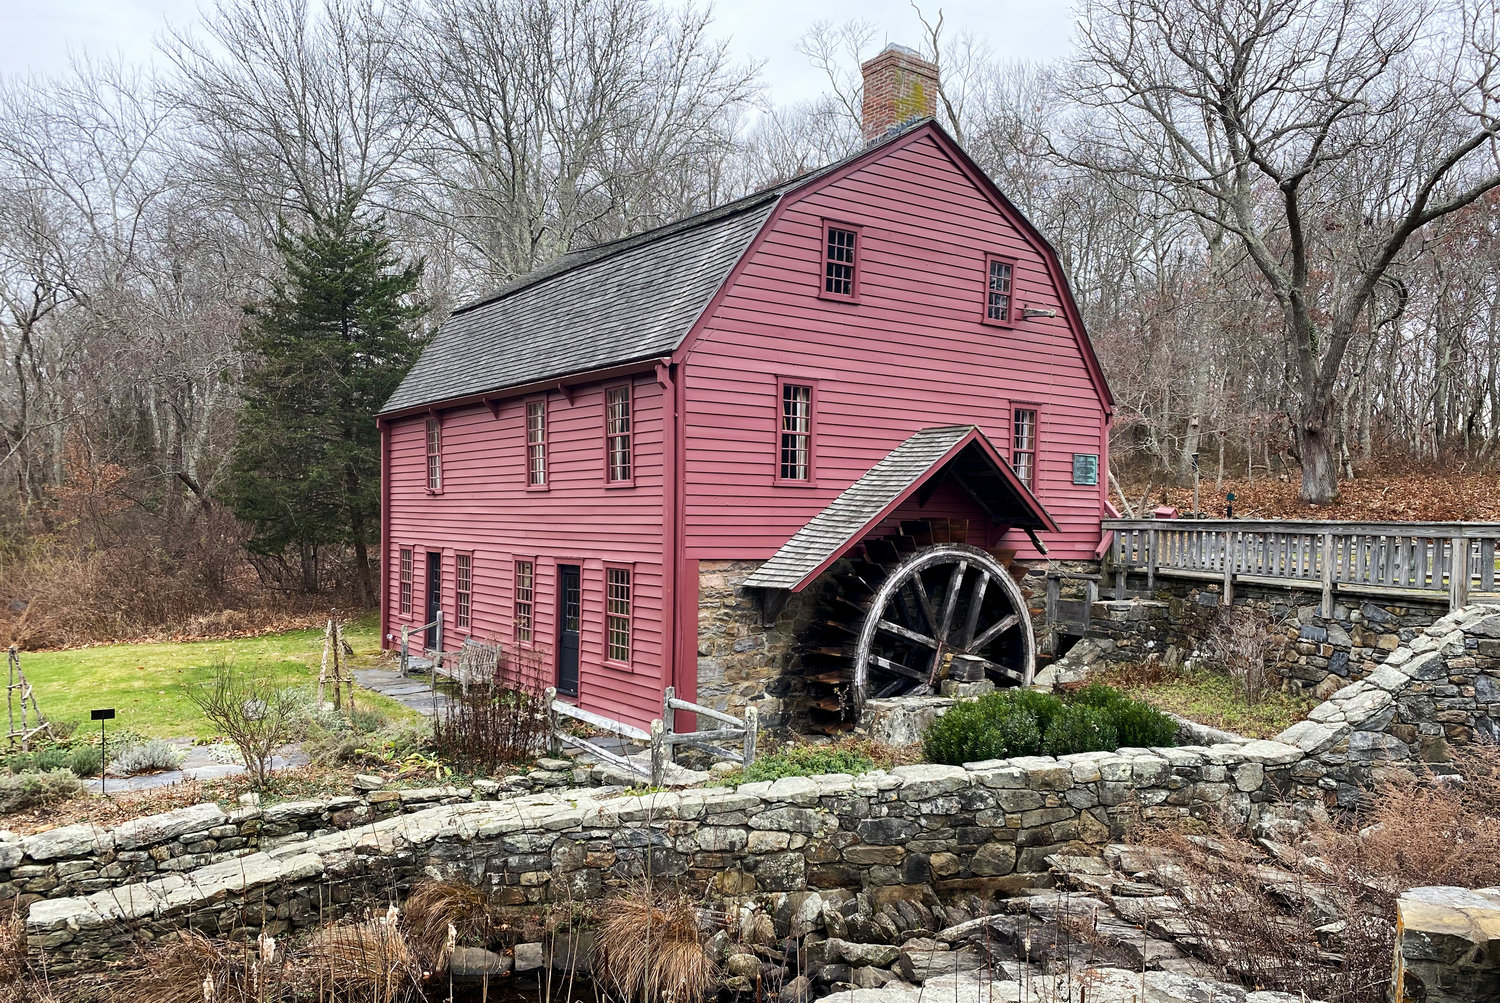 The Gilbert Stuart Museum is the site of the herring run getting an update